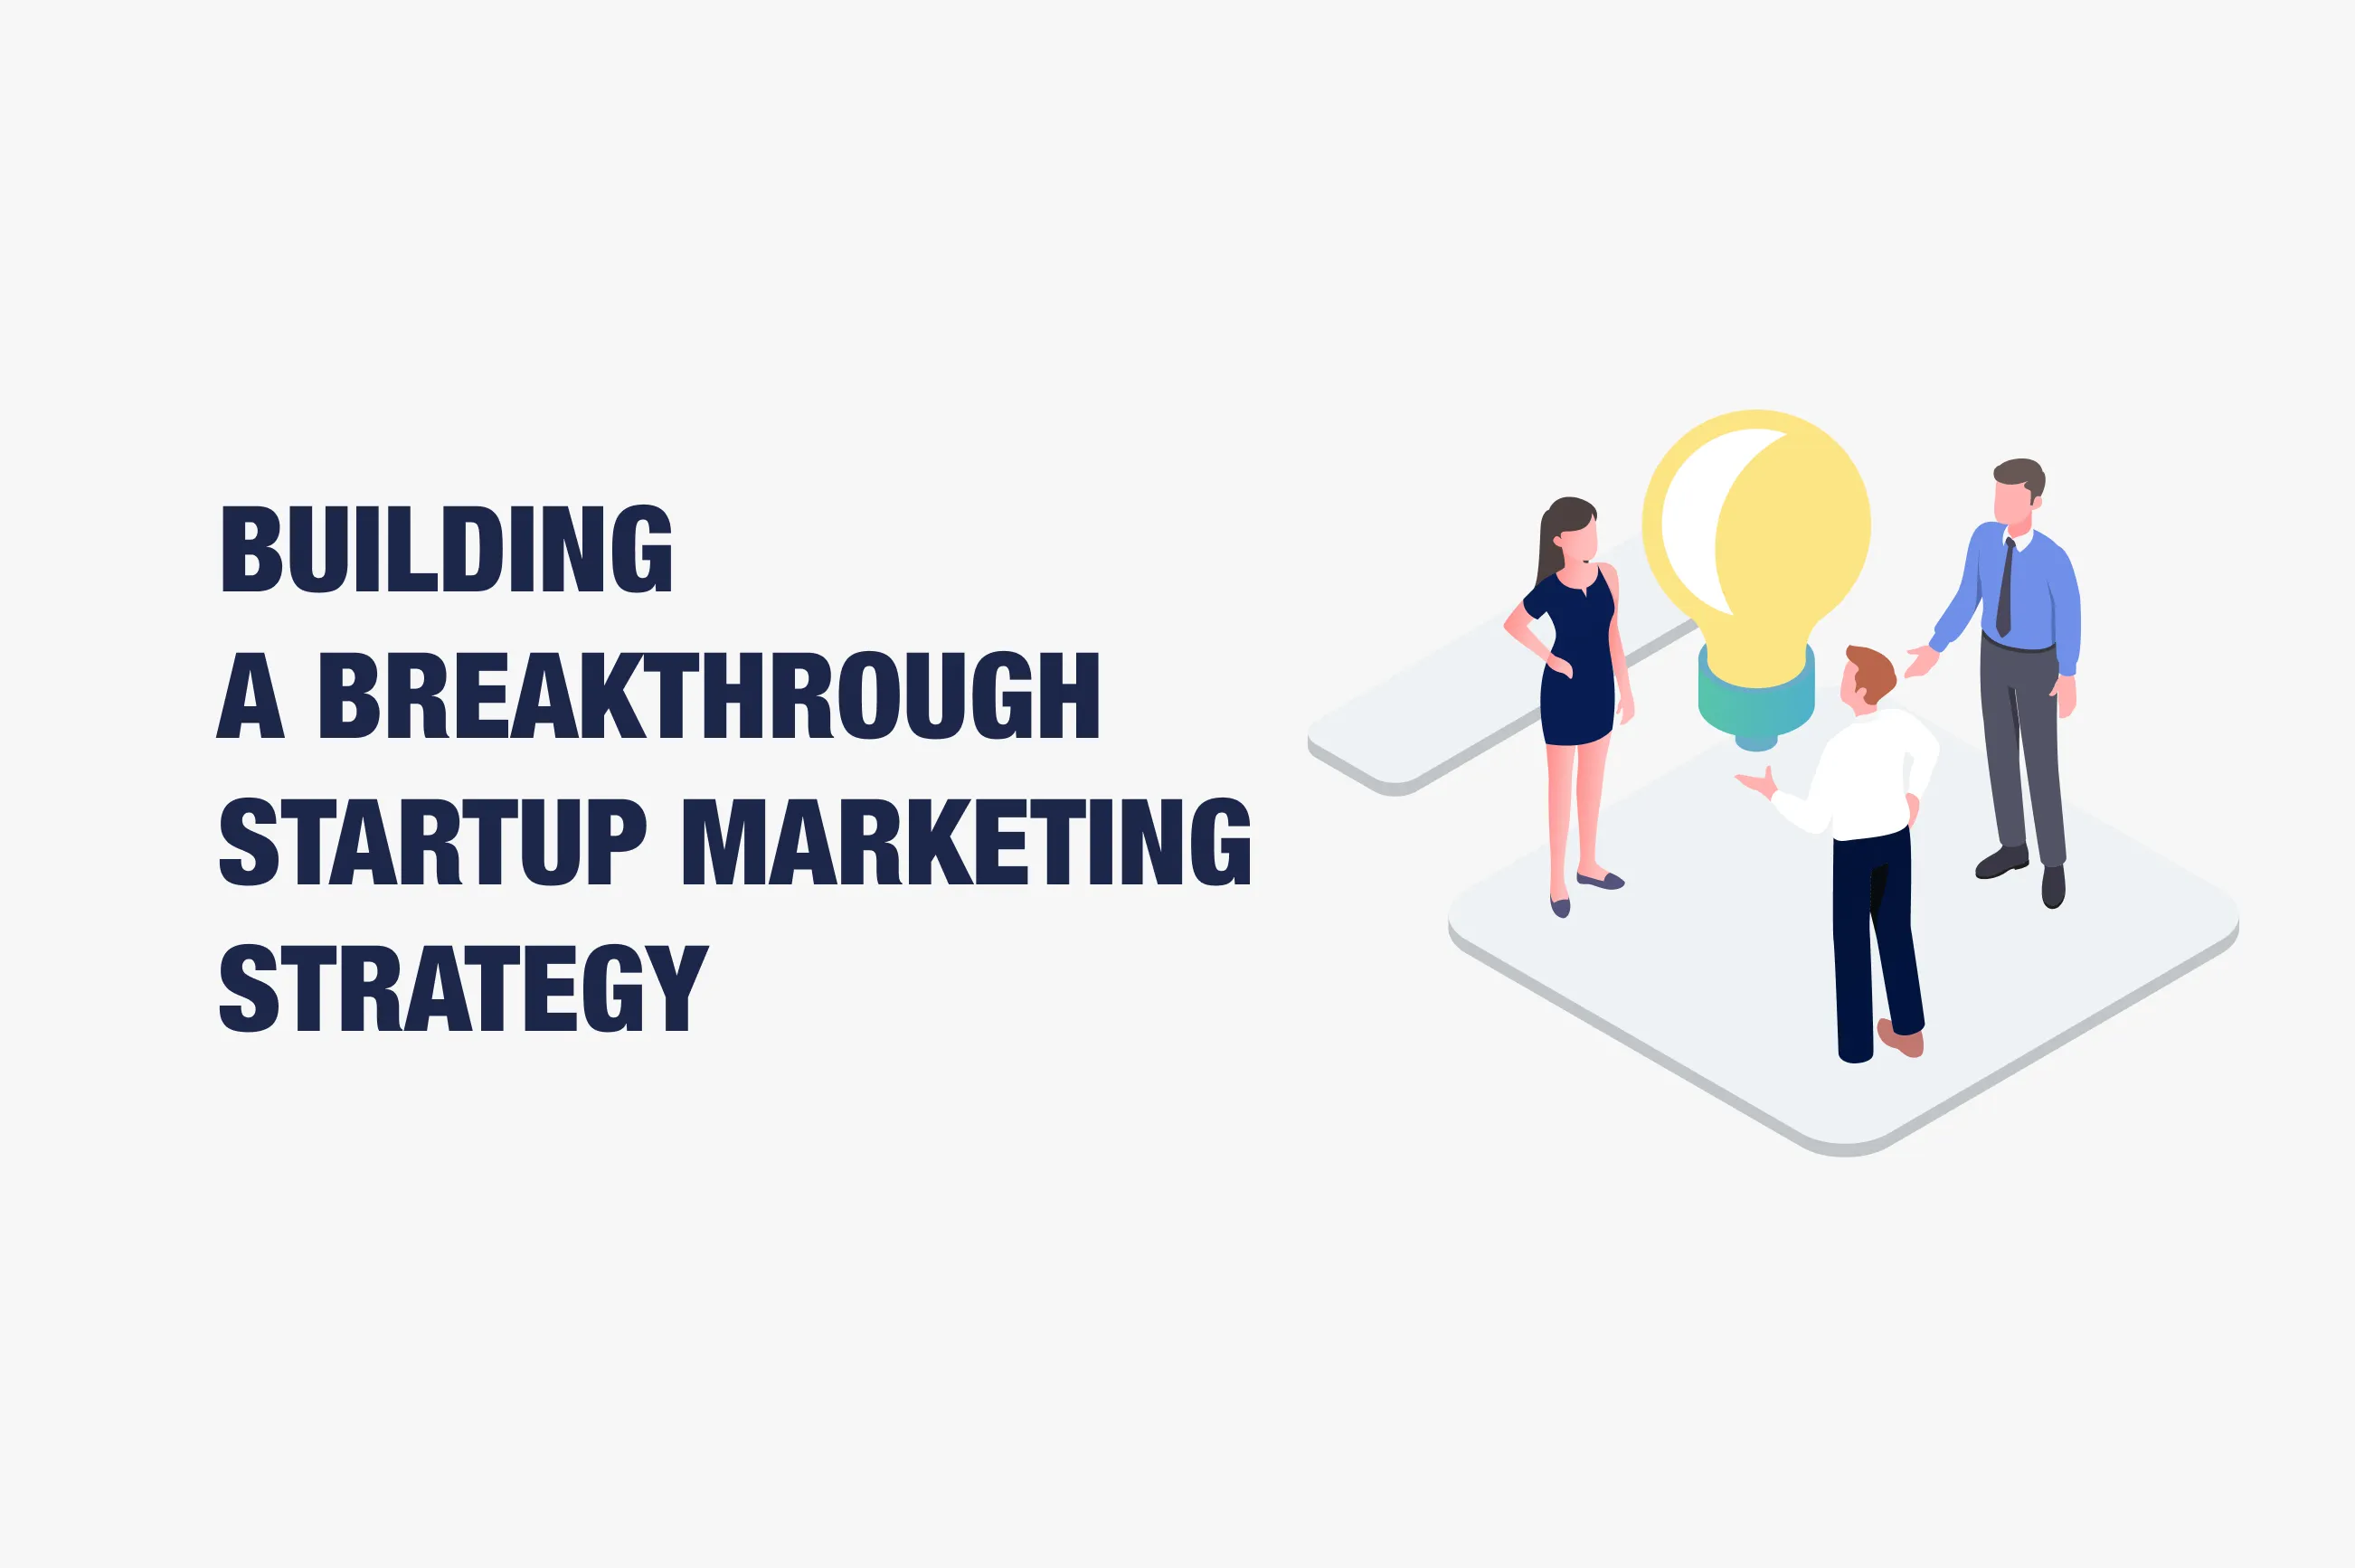 Channels to Include in a Marketing Strategy for a Startup